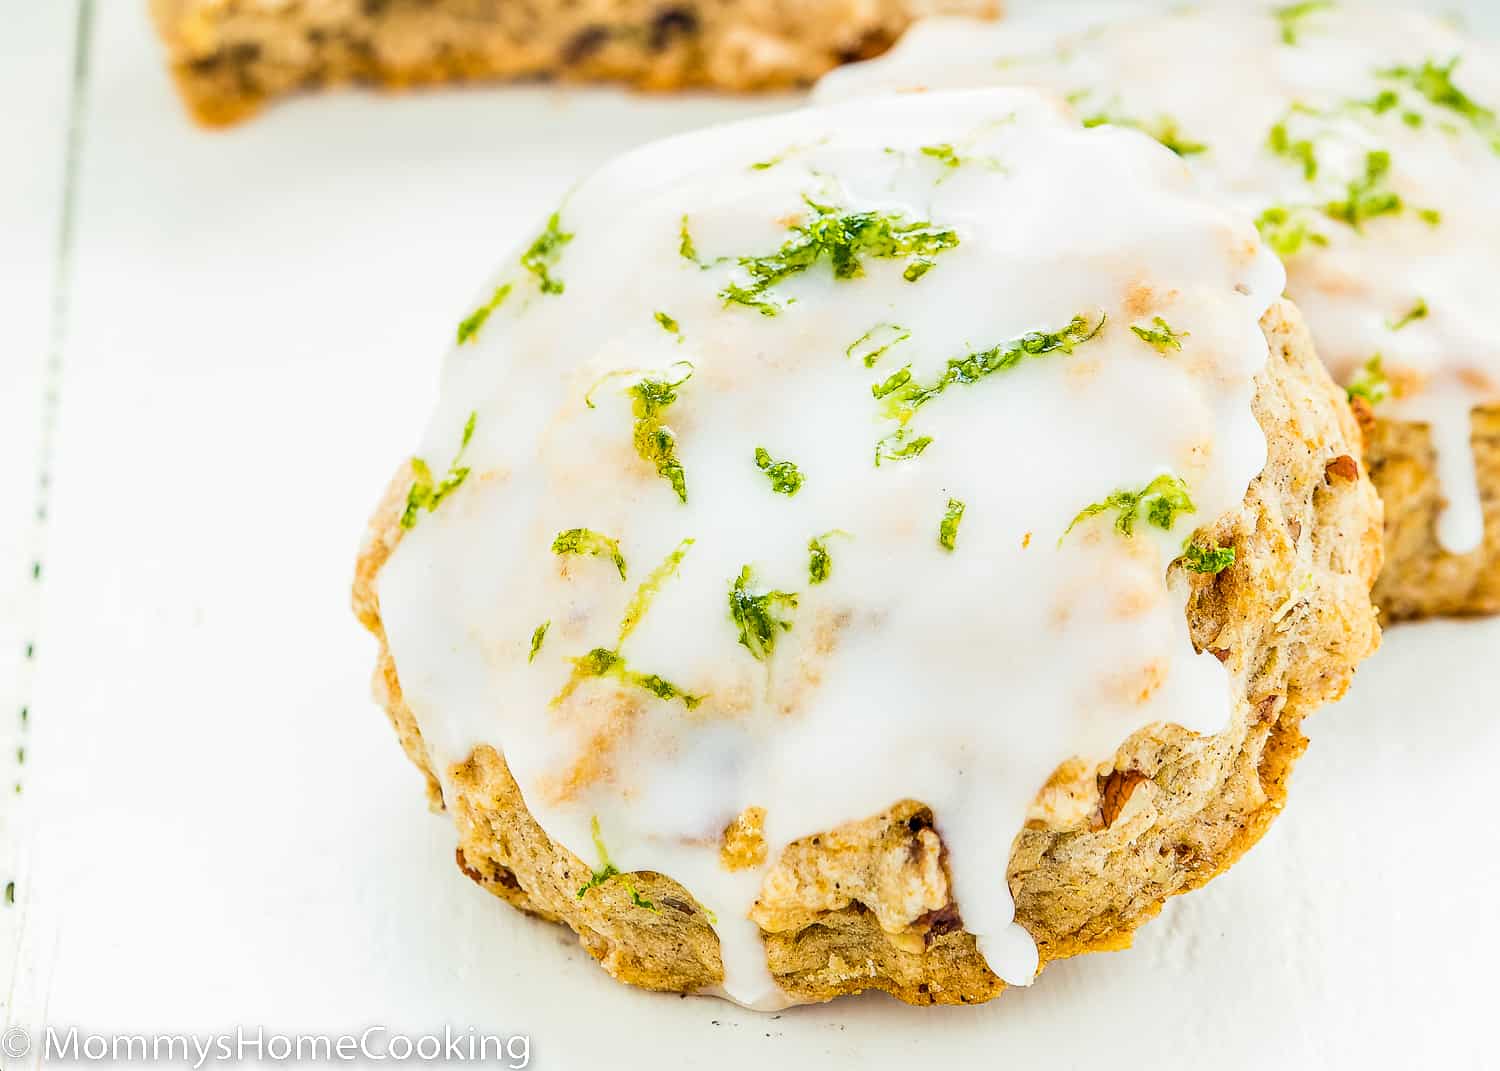 Eggless Gingerbread Scone with glaze and lime zest.